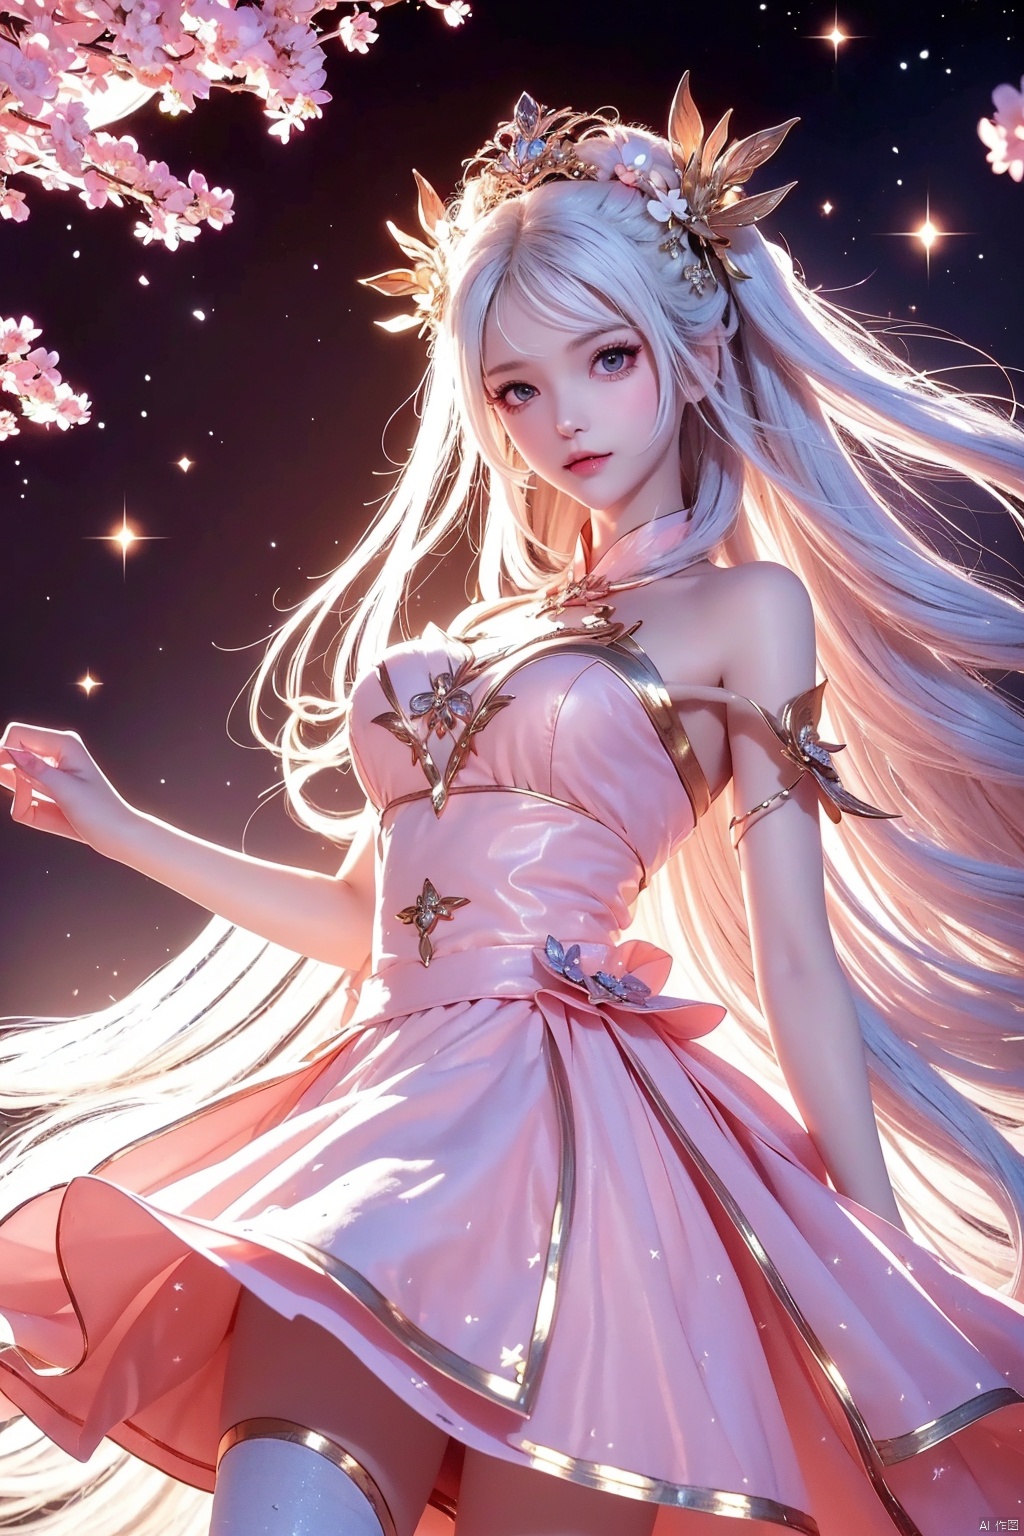  (three quarters body shot:1.4),(masterpiece),(top quality, best quality, official art, beauty and aesthetics:1.2),cg photos,white hair,(solo:1.2),mature_female,Peach blossoms, pink clothes, short skirts, white stockings,closed_mouth,bare_shoulders,(tight:1.2),bare_shoulder,Short neck,Bright tones,sexy girl,bright,light,Royal Sister,night,,RoyalSister face,,round face,baby face,print,looking_at_viewer,Peach blossoms,pink flower,pink petal,starry,star_(sky), RoyalSister Face